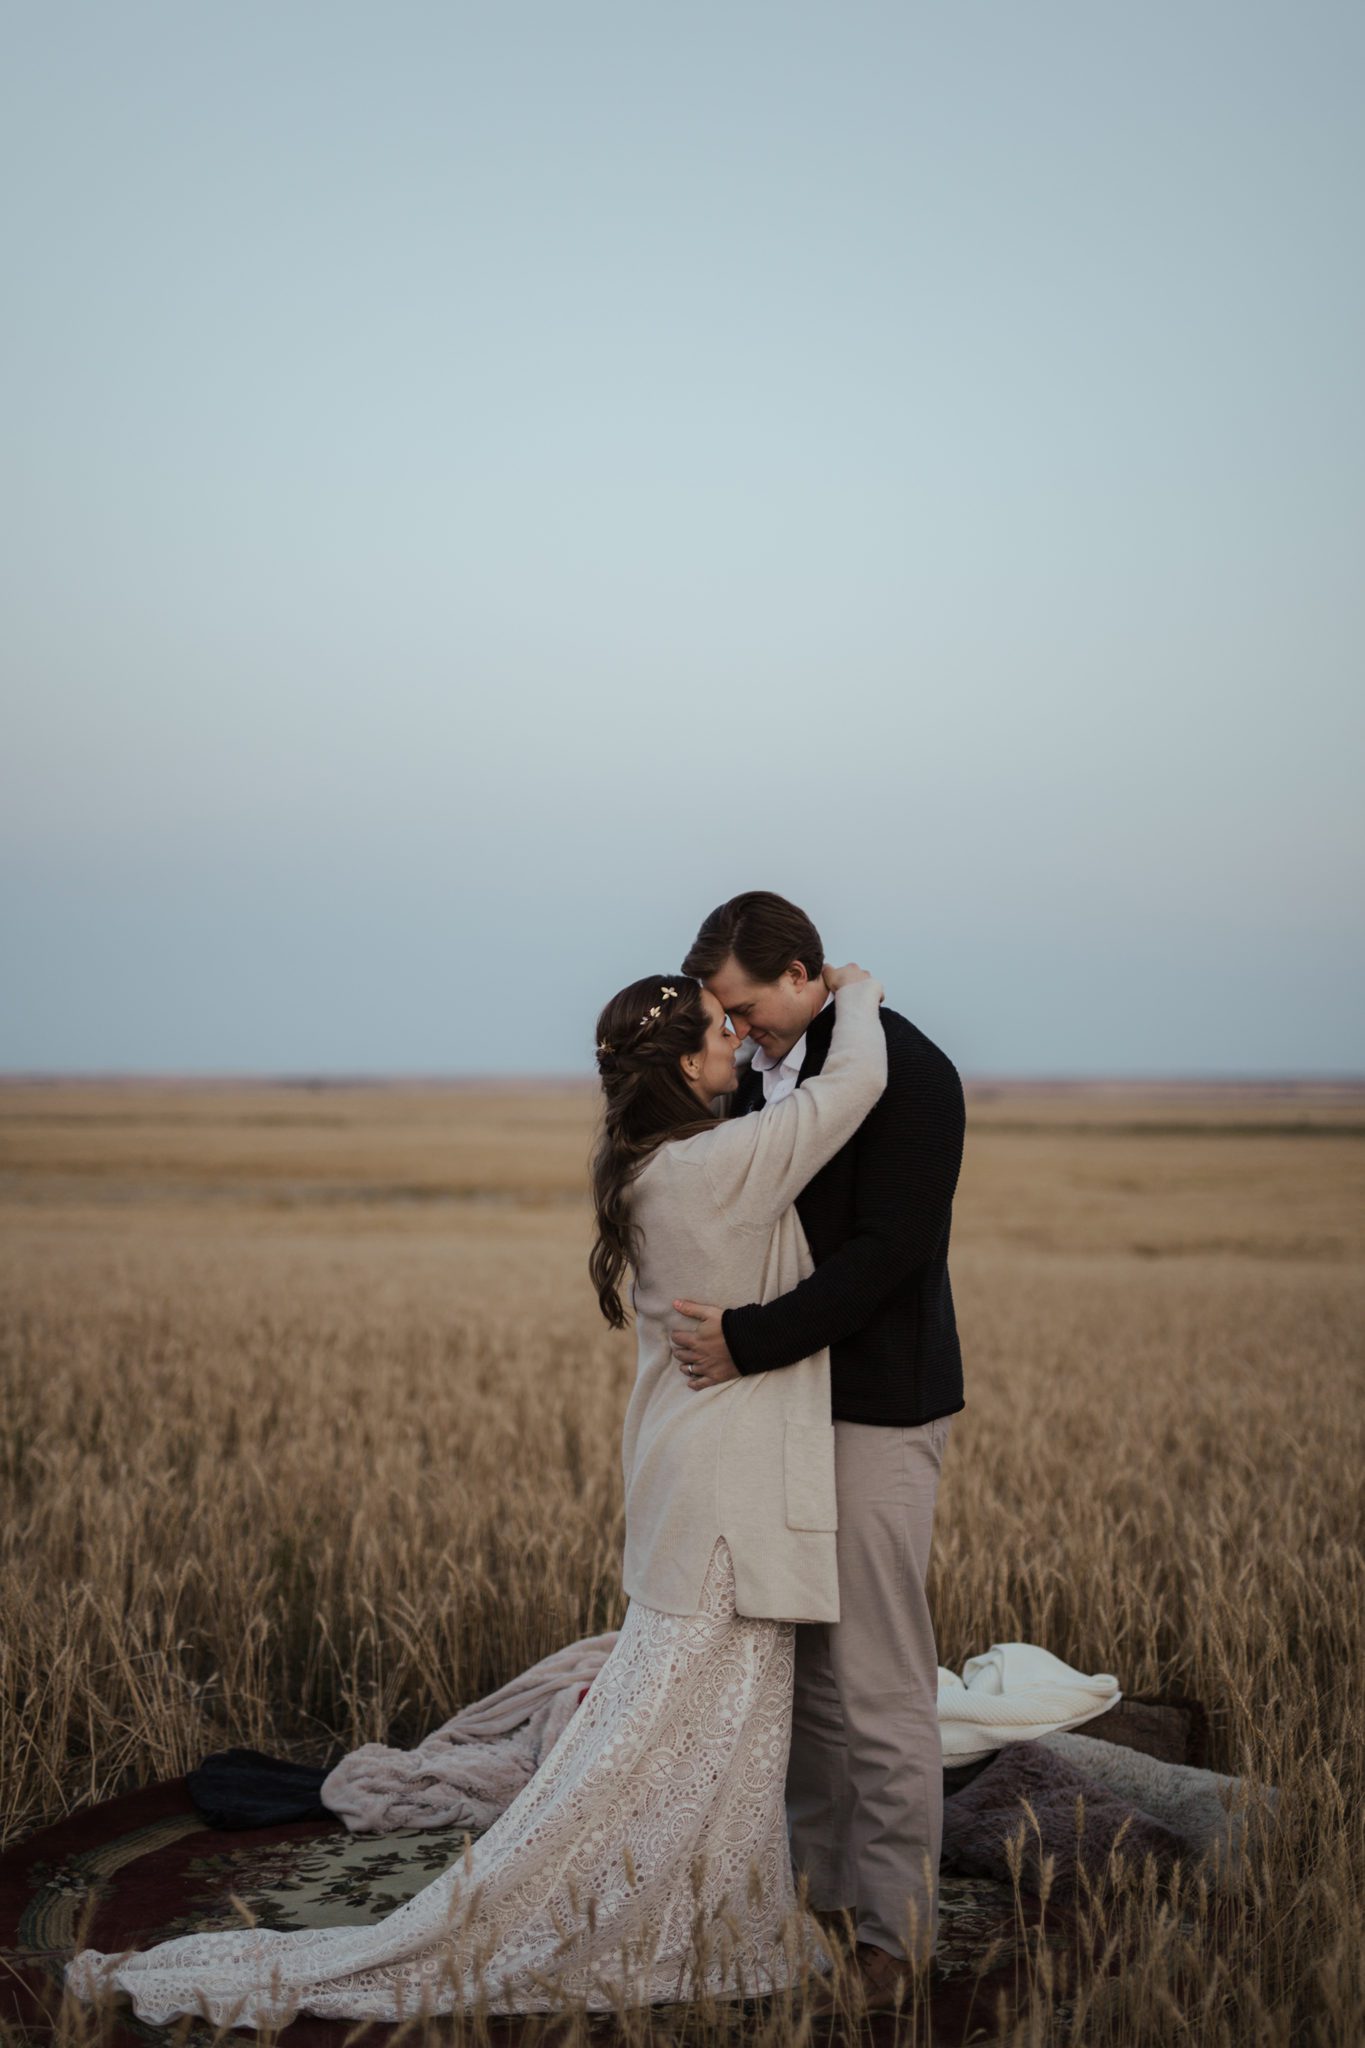 The newlyweds embrace each other while sharing a first dance in an open field, fall vow renewal inspiration. 